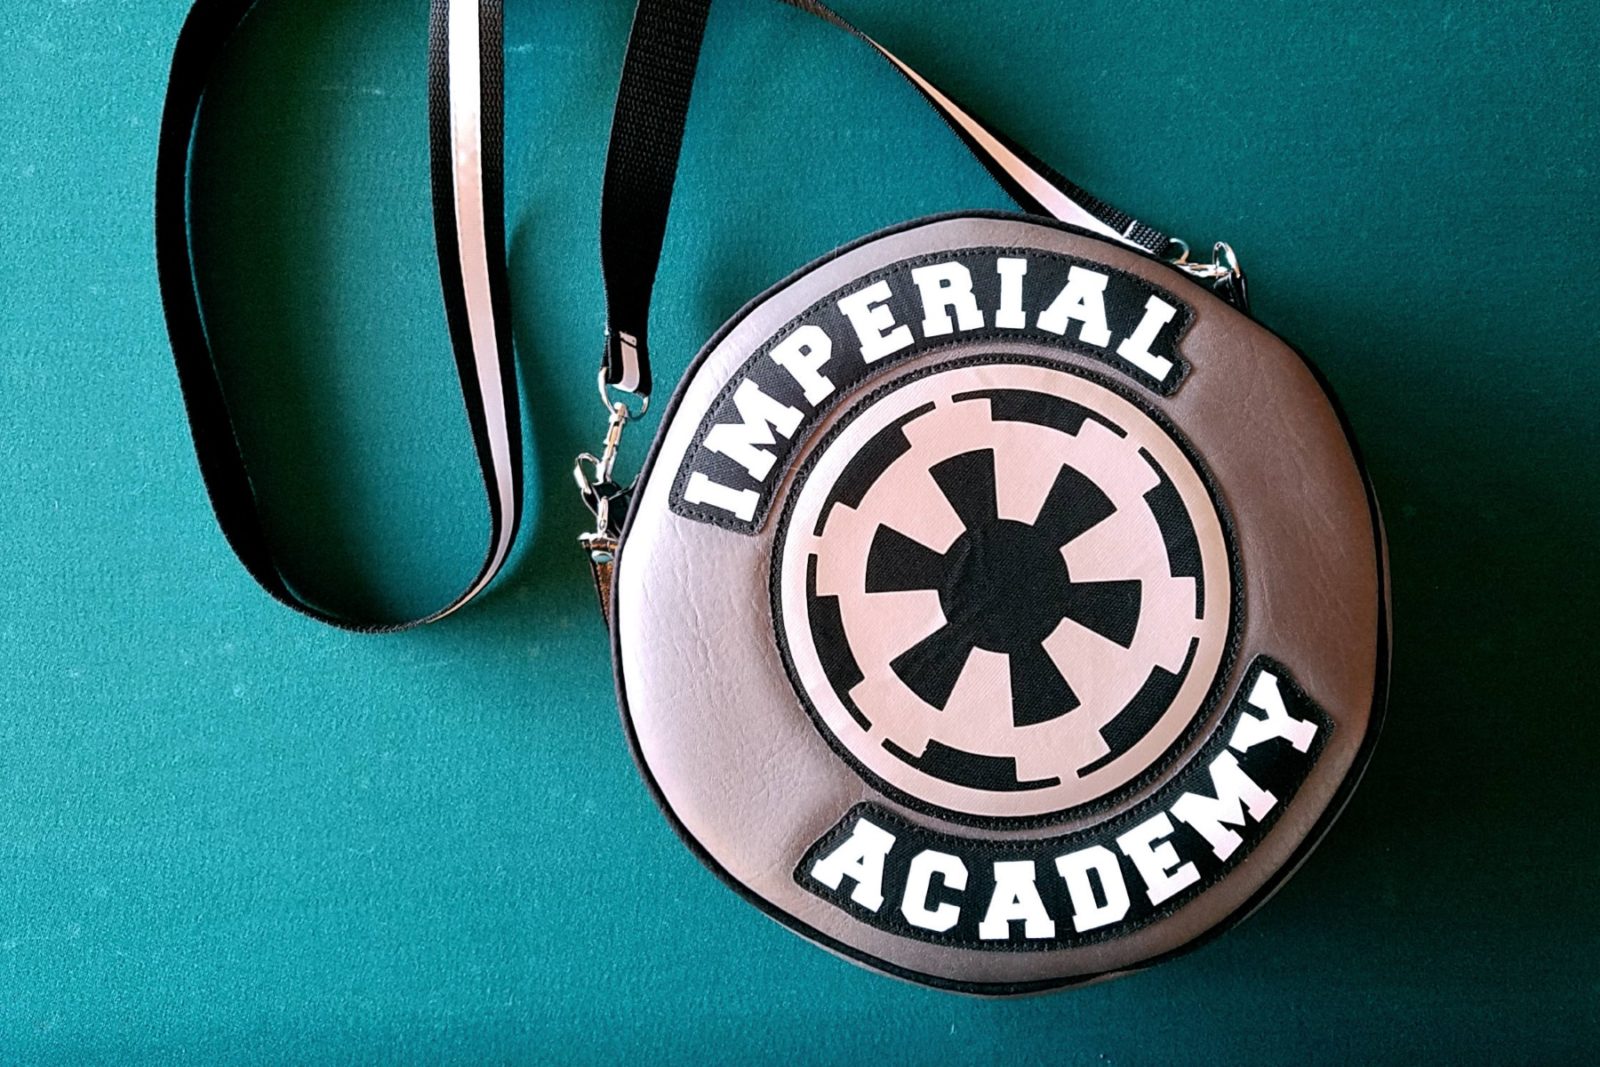 Star Wars Imperial Academy handbag made by Etsy seller BenaeQuee Creations